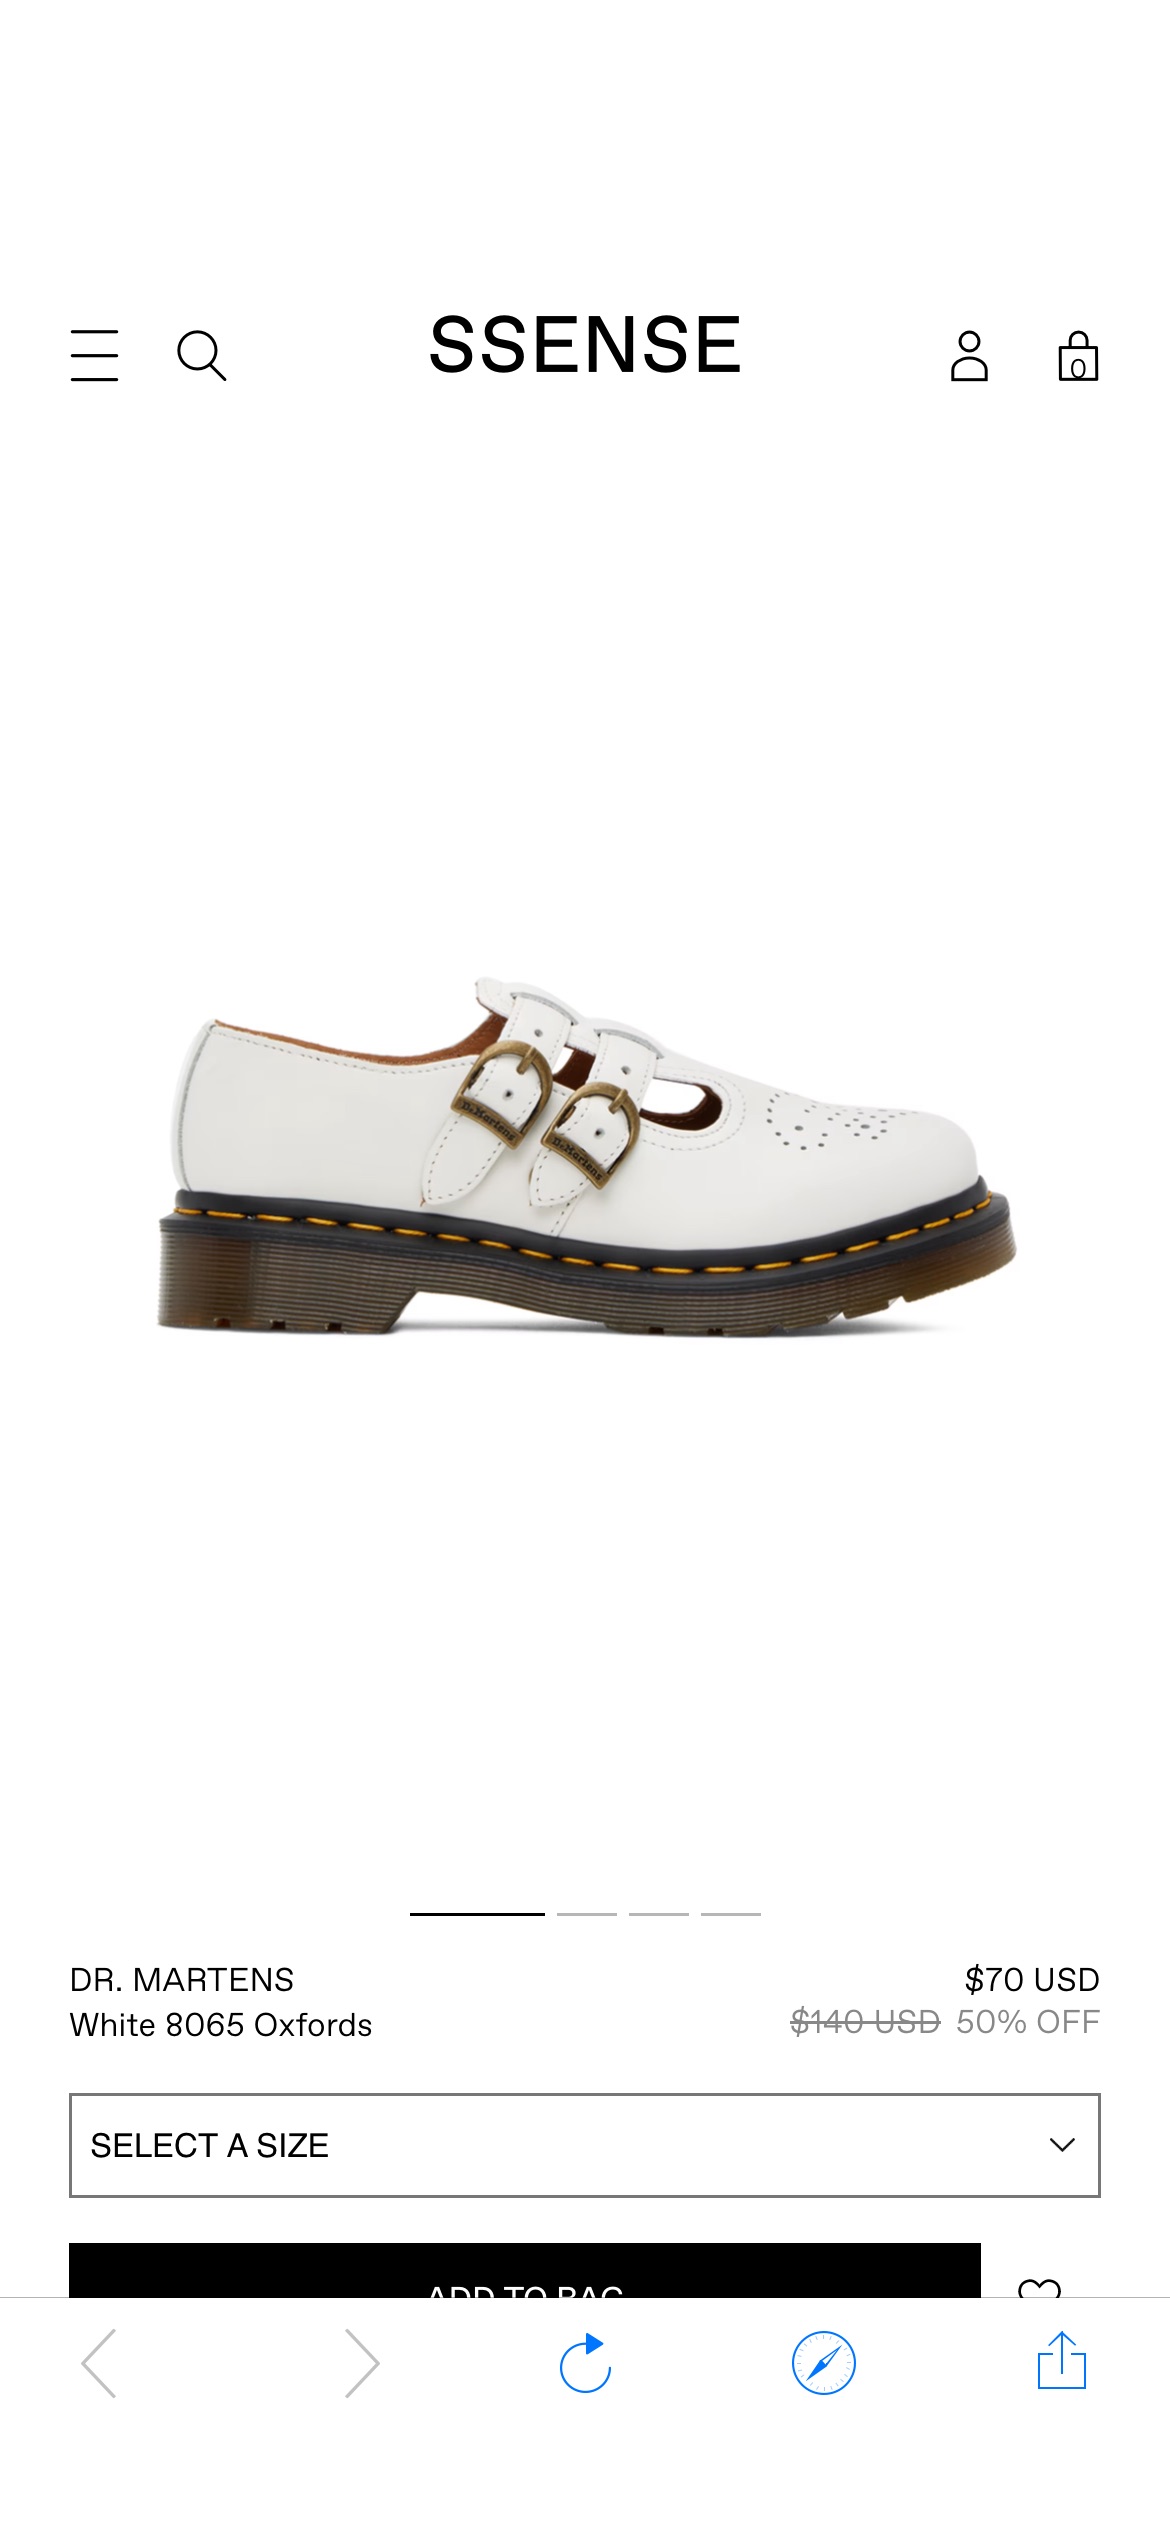 White 8065 Oxfords by Dr. Martens on Sale